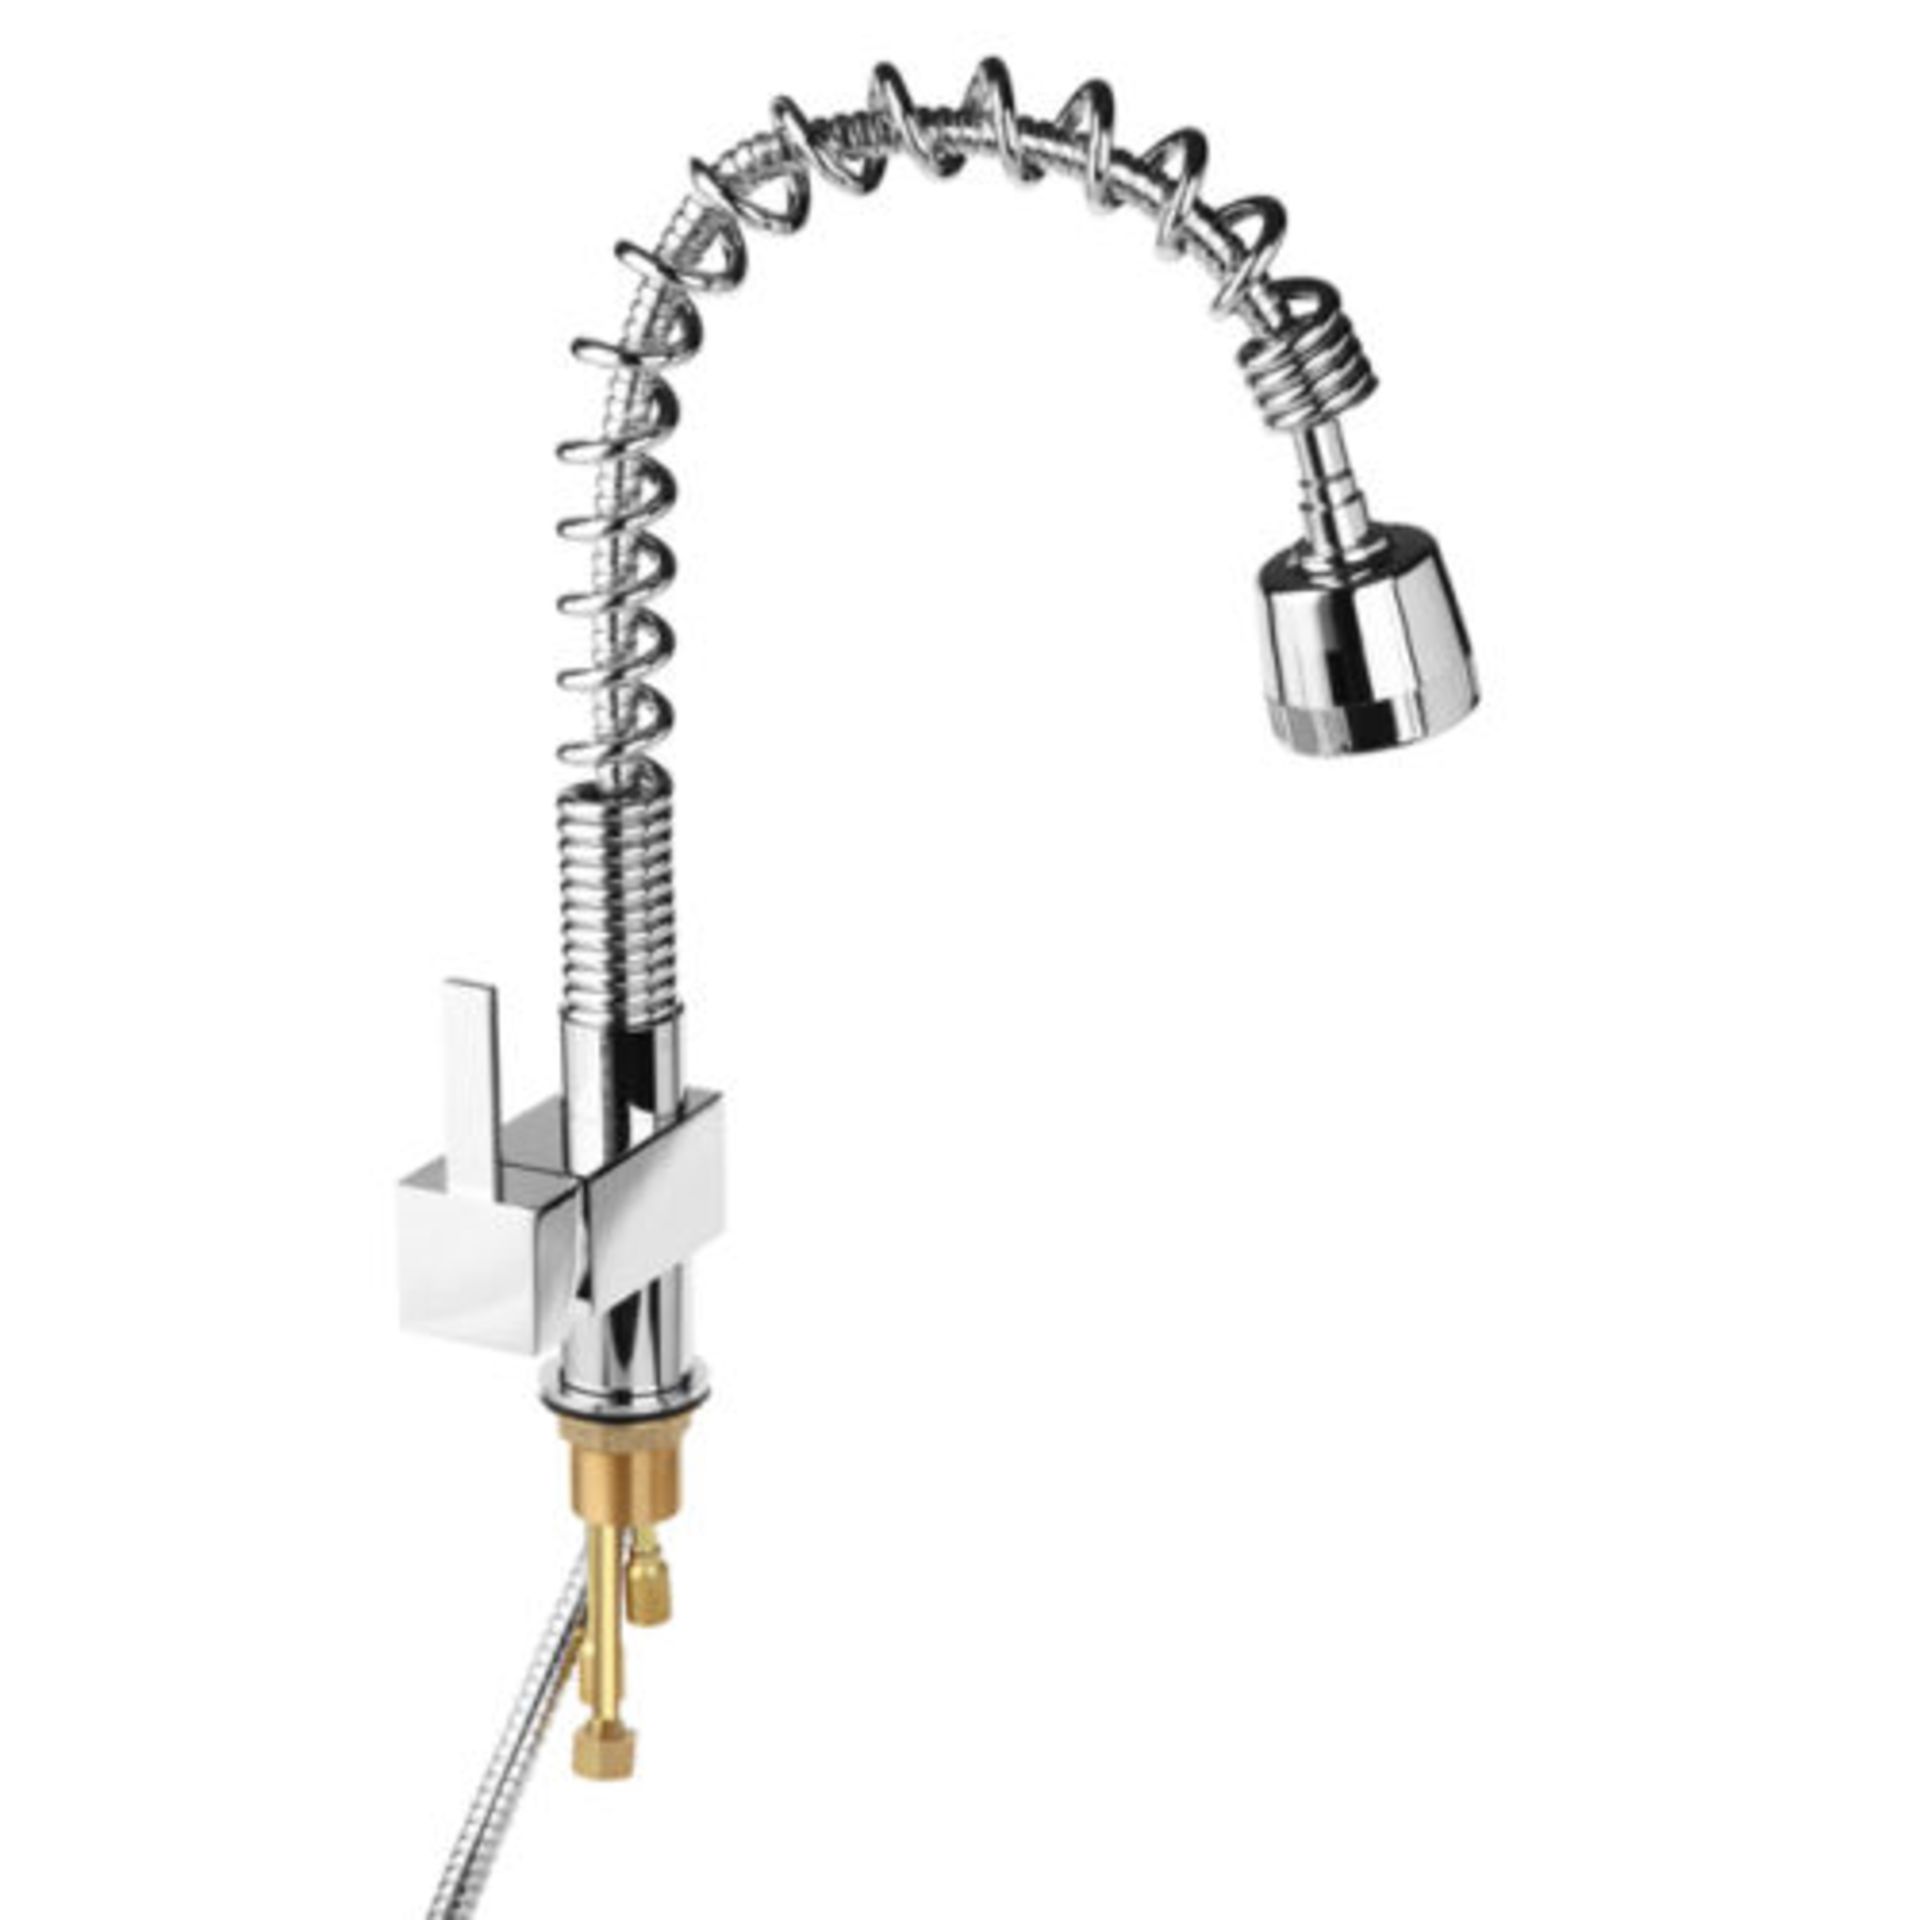 (CP141) Maddie Brushed Chrome Monobloc Kitchen Tap Swivel Pull Out Spray Mixer. RRP £219.99. - Image 2 of 3